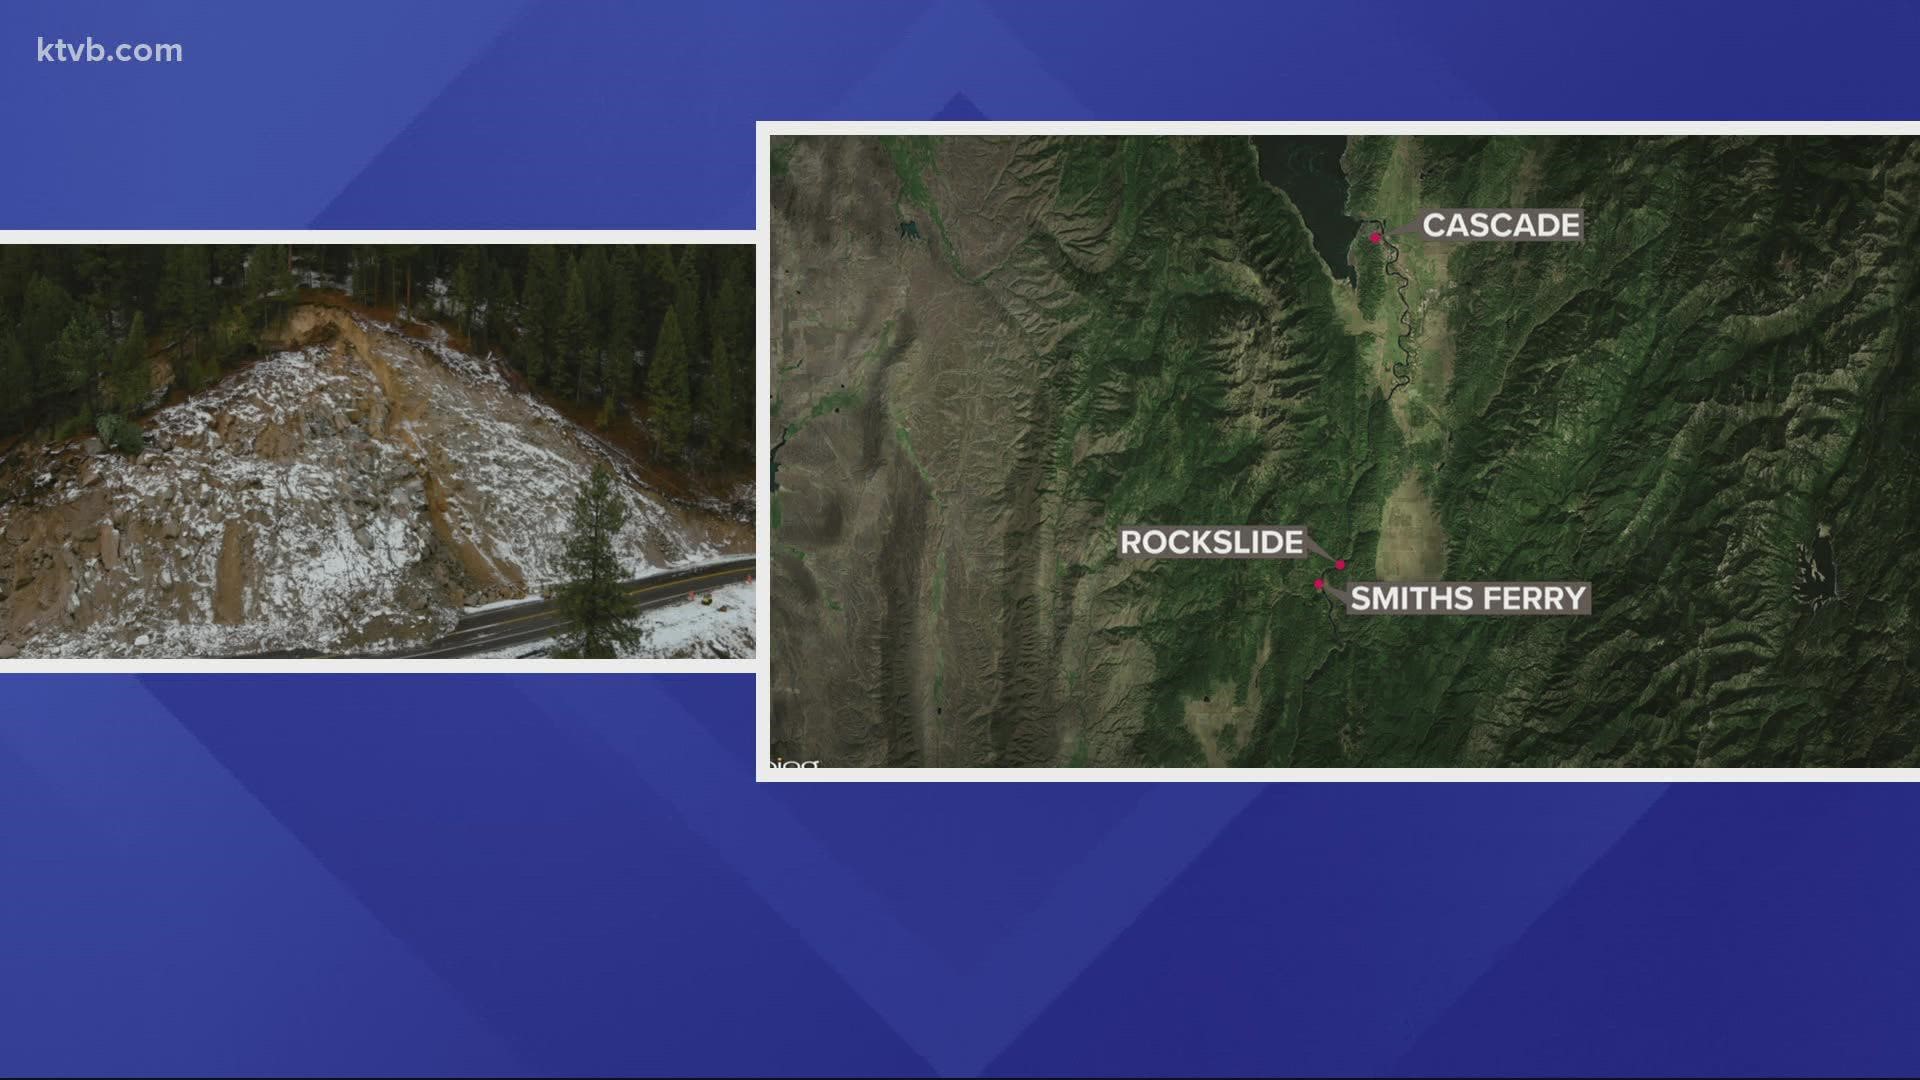 A stretch of Highway 55 is expected to remain closed for another 7-10 days. It first closed Nov. 18 after a rockslide.